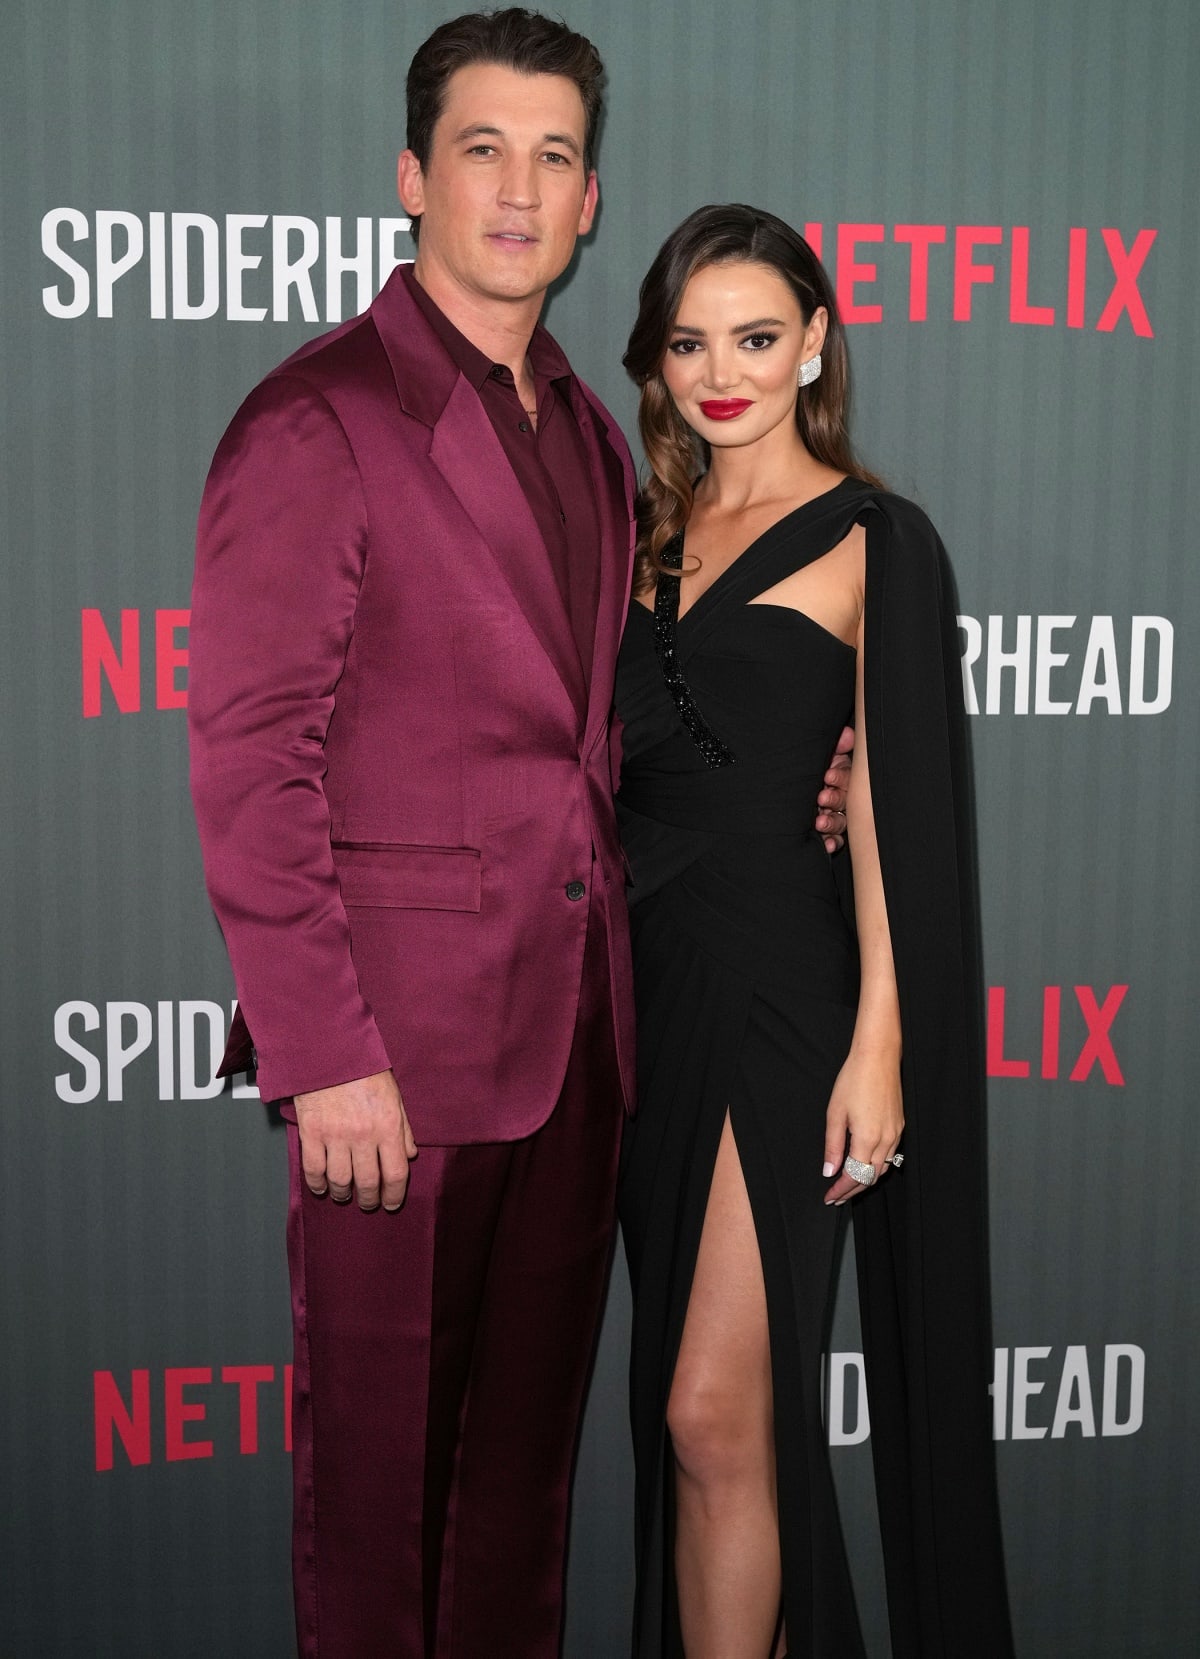 At the Spiderhead premiere, Miles Teller brought Keleigh Sperry as his date